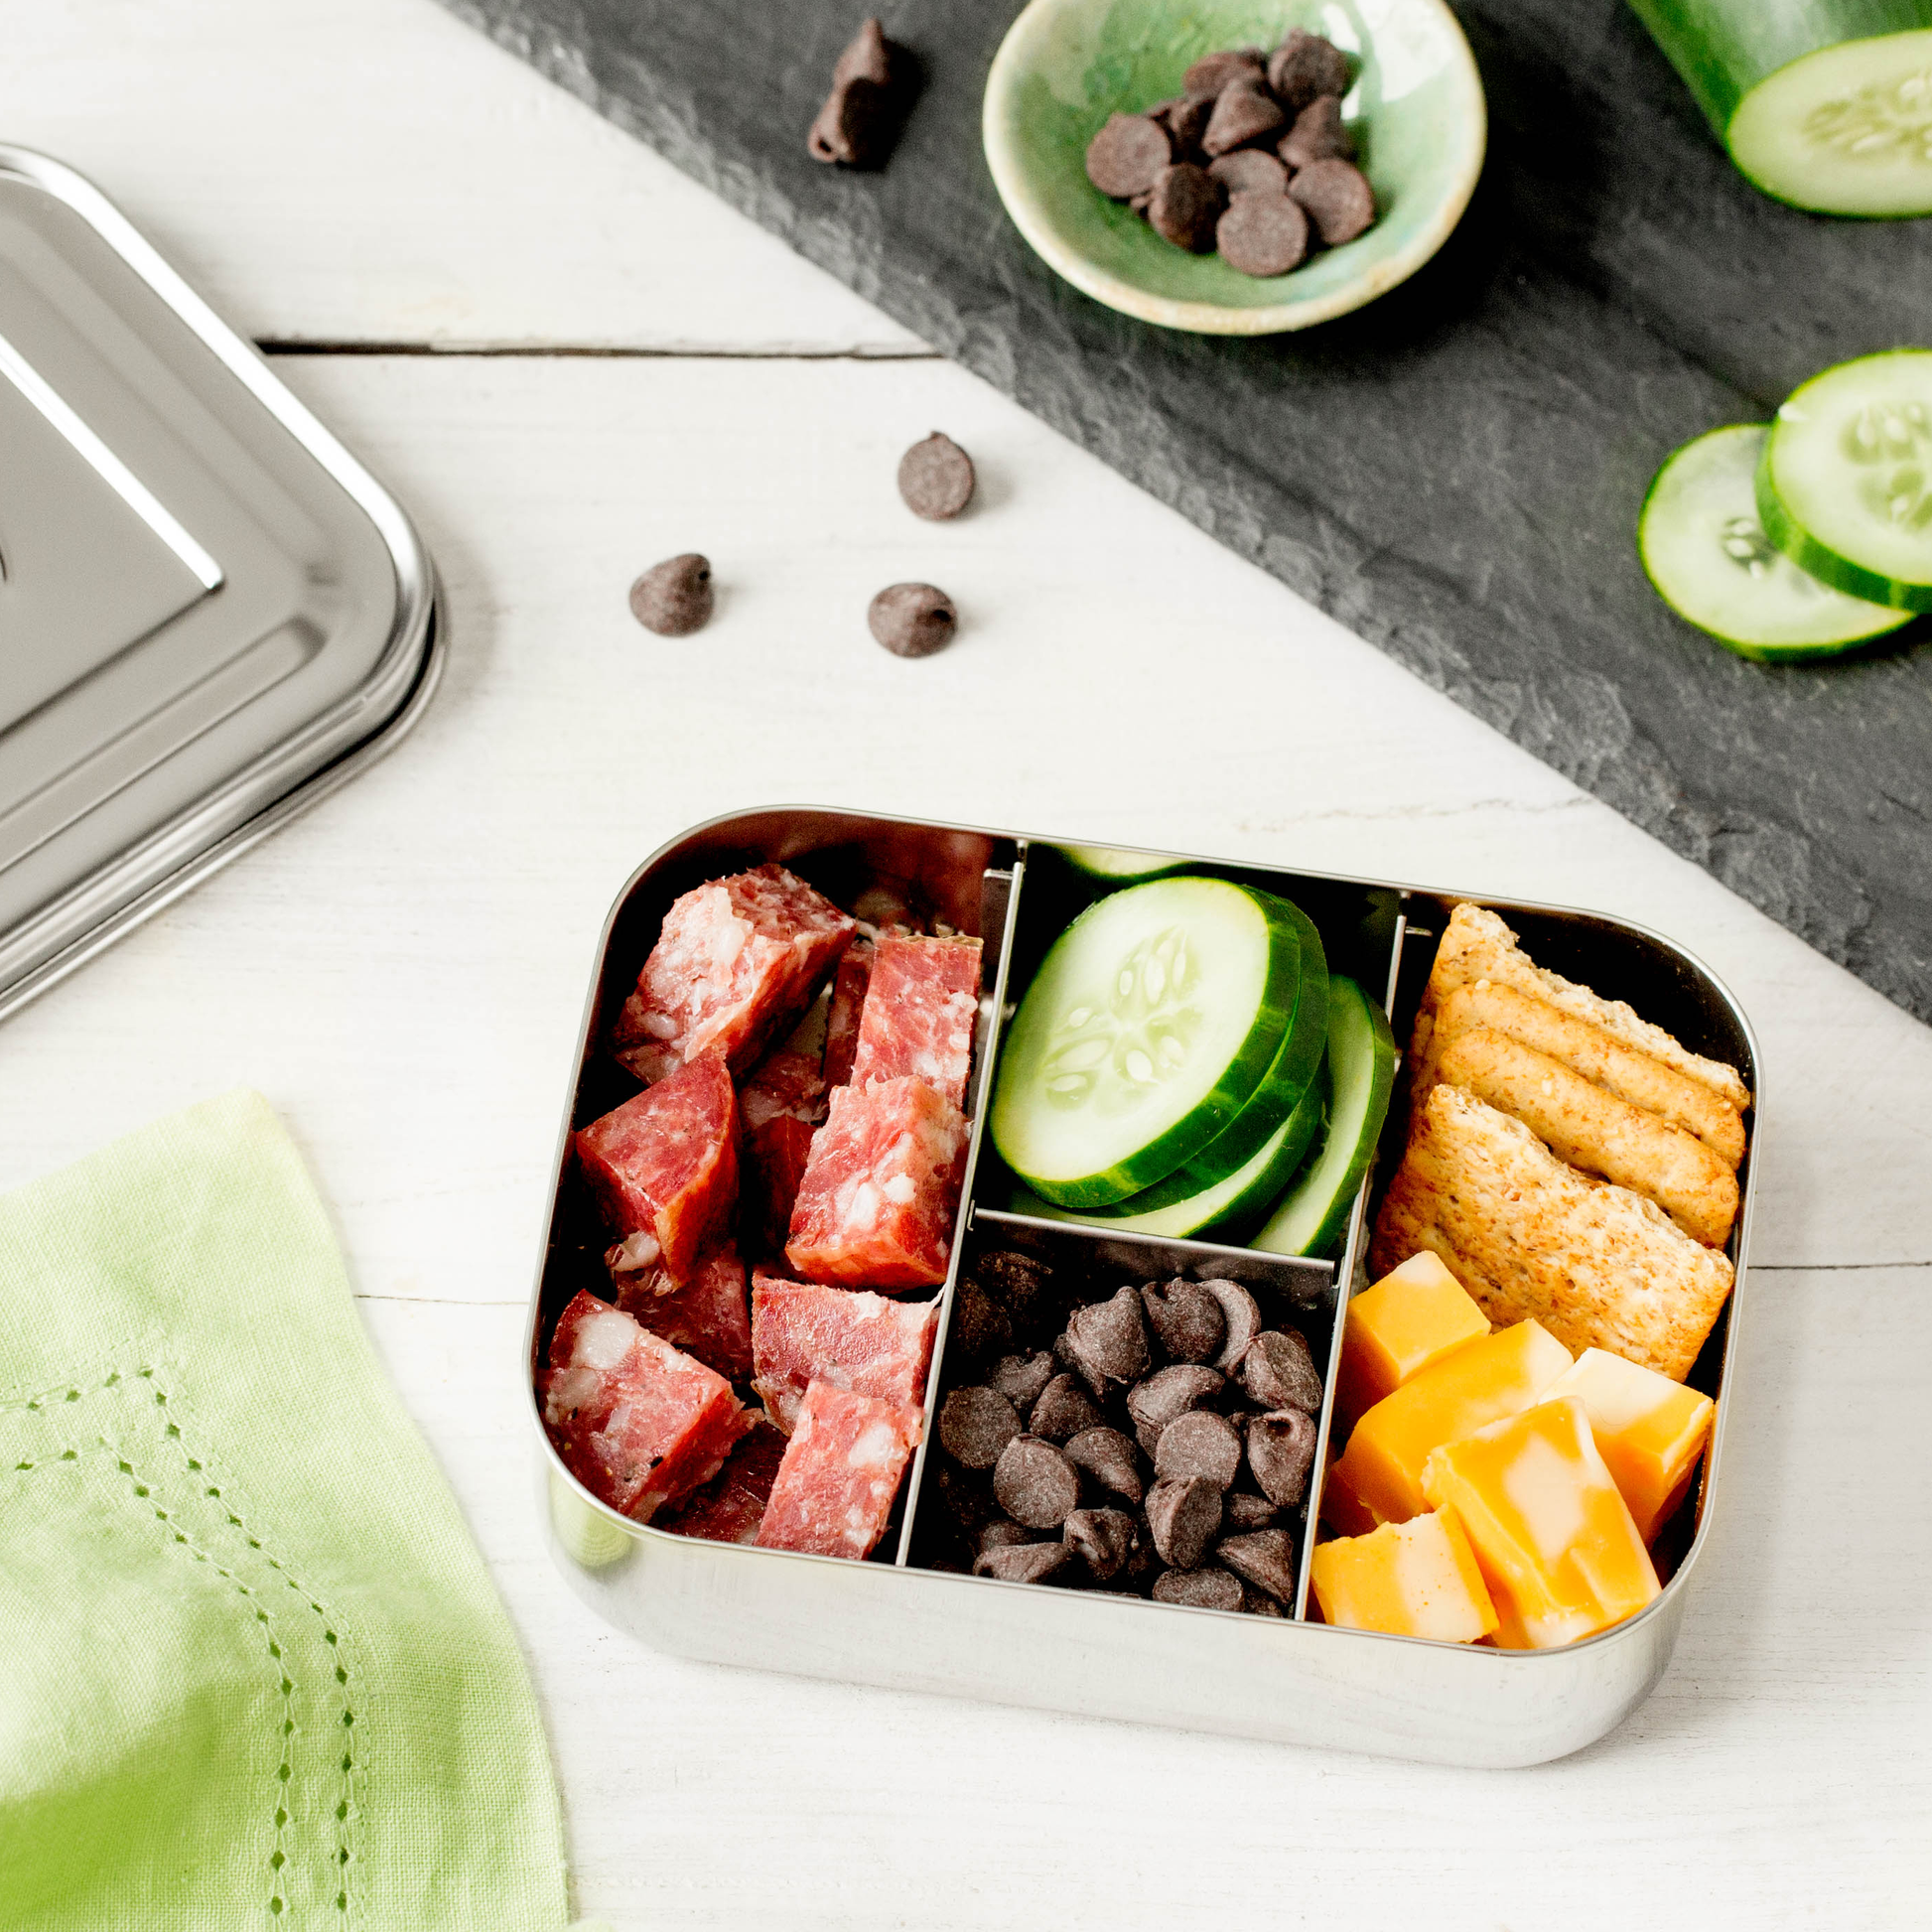 LunchBots Stainless Steel Bento Lunch Box 2 Sections - Stainless Steel